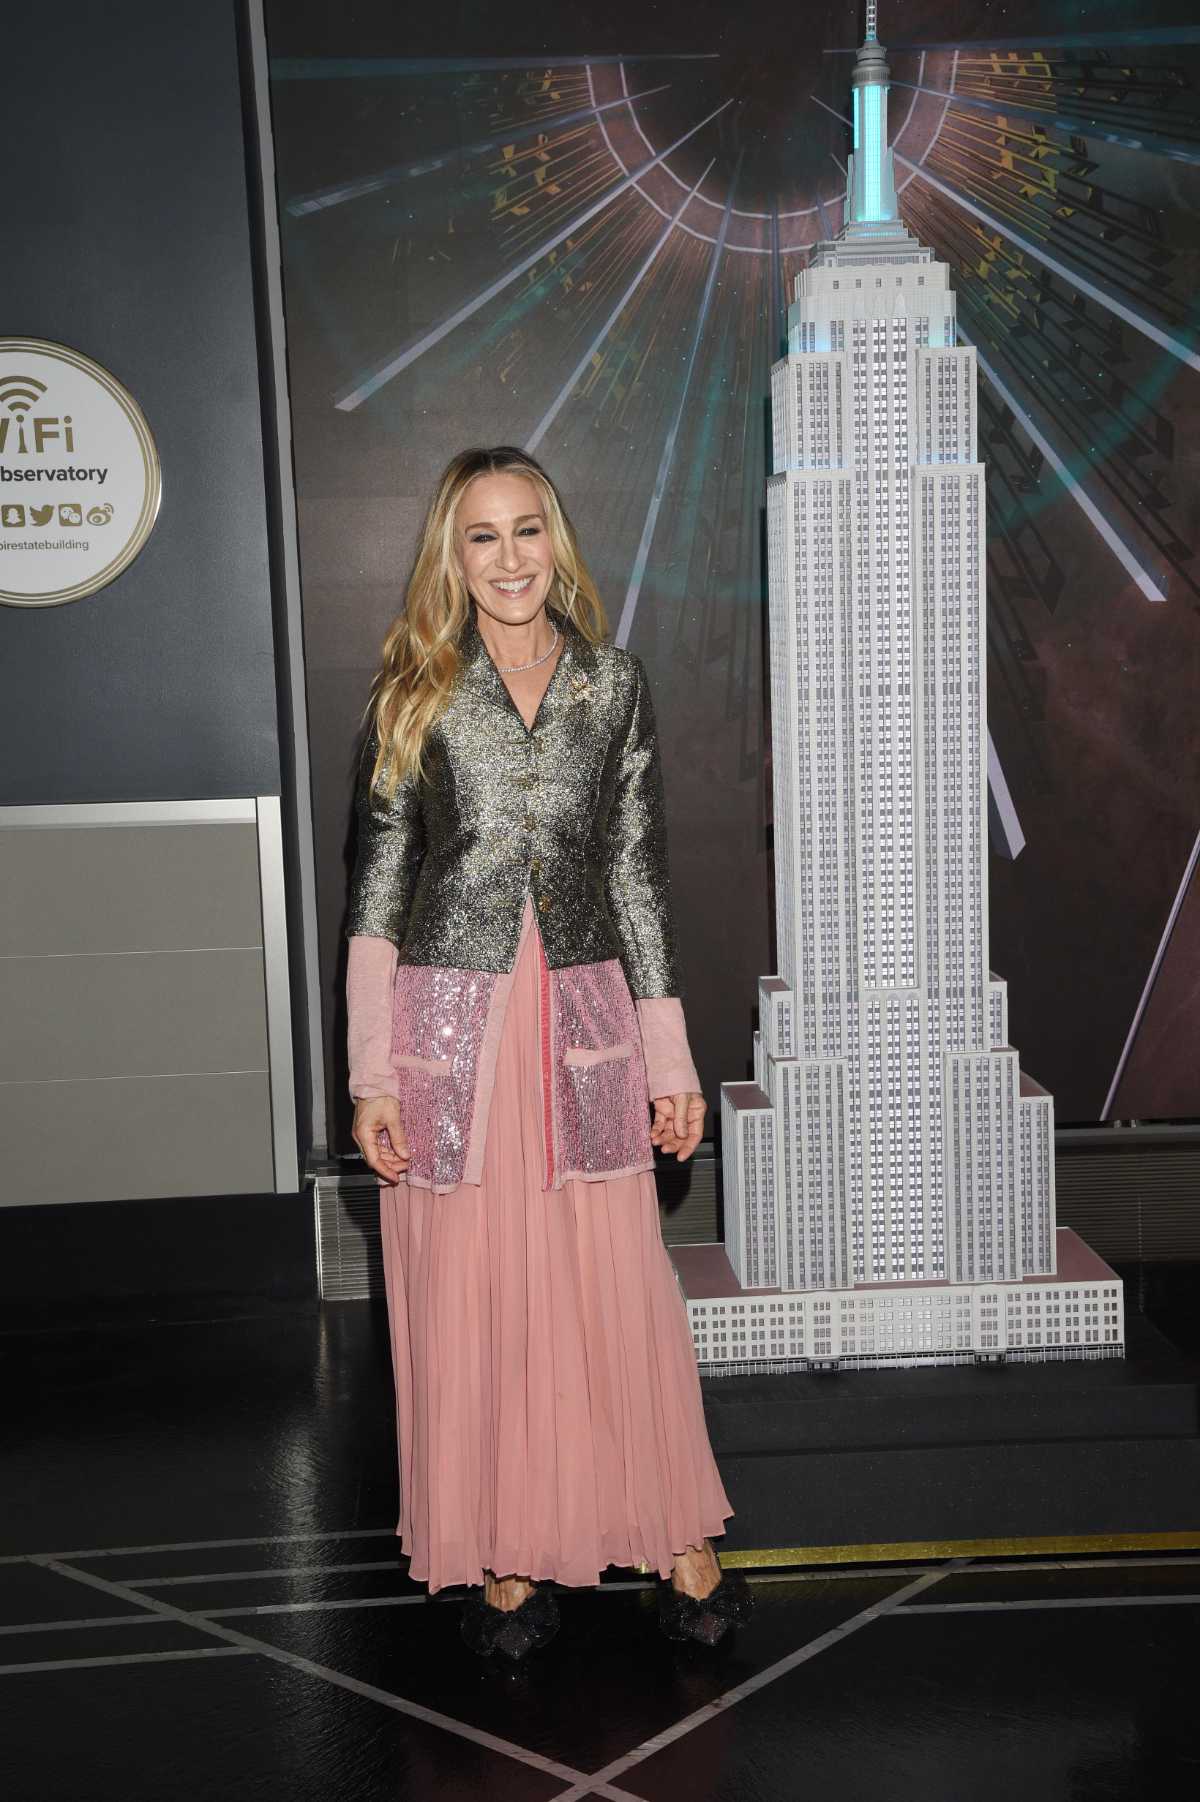 Tiffany & Co. Lights Up the Empire State Building in Iconic Tiffany Blue® with Sarah Jessica Parker